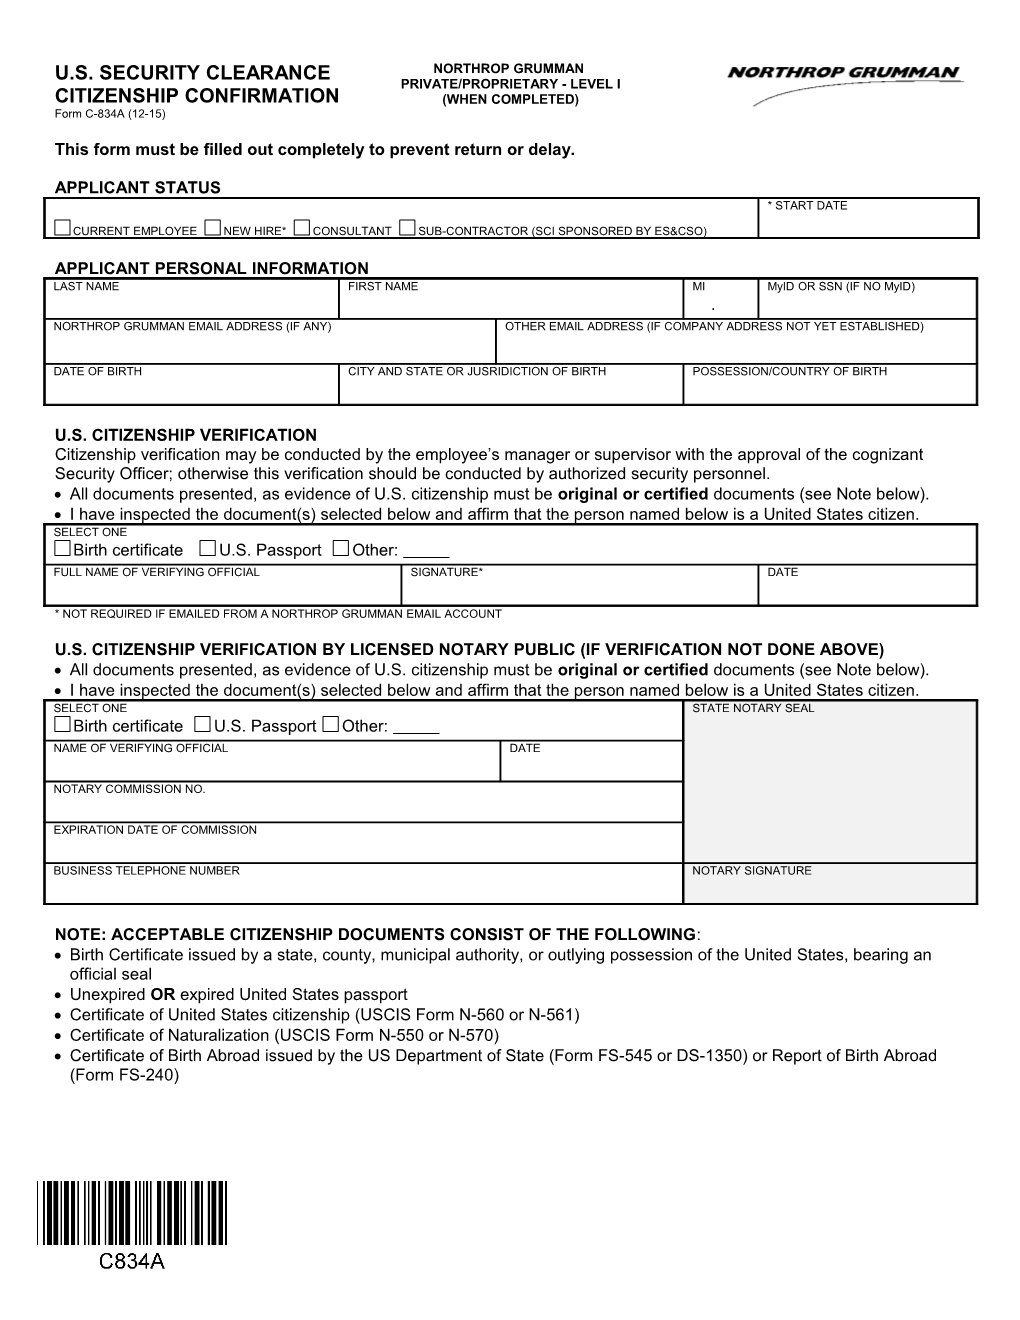 U.S. Security Clearance Citizenship Confirmation